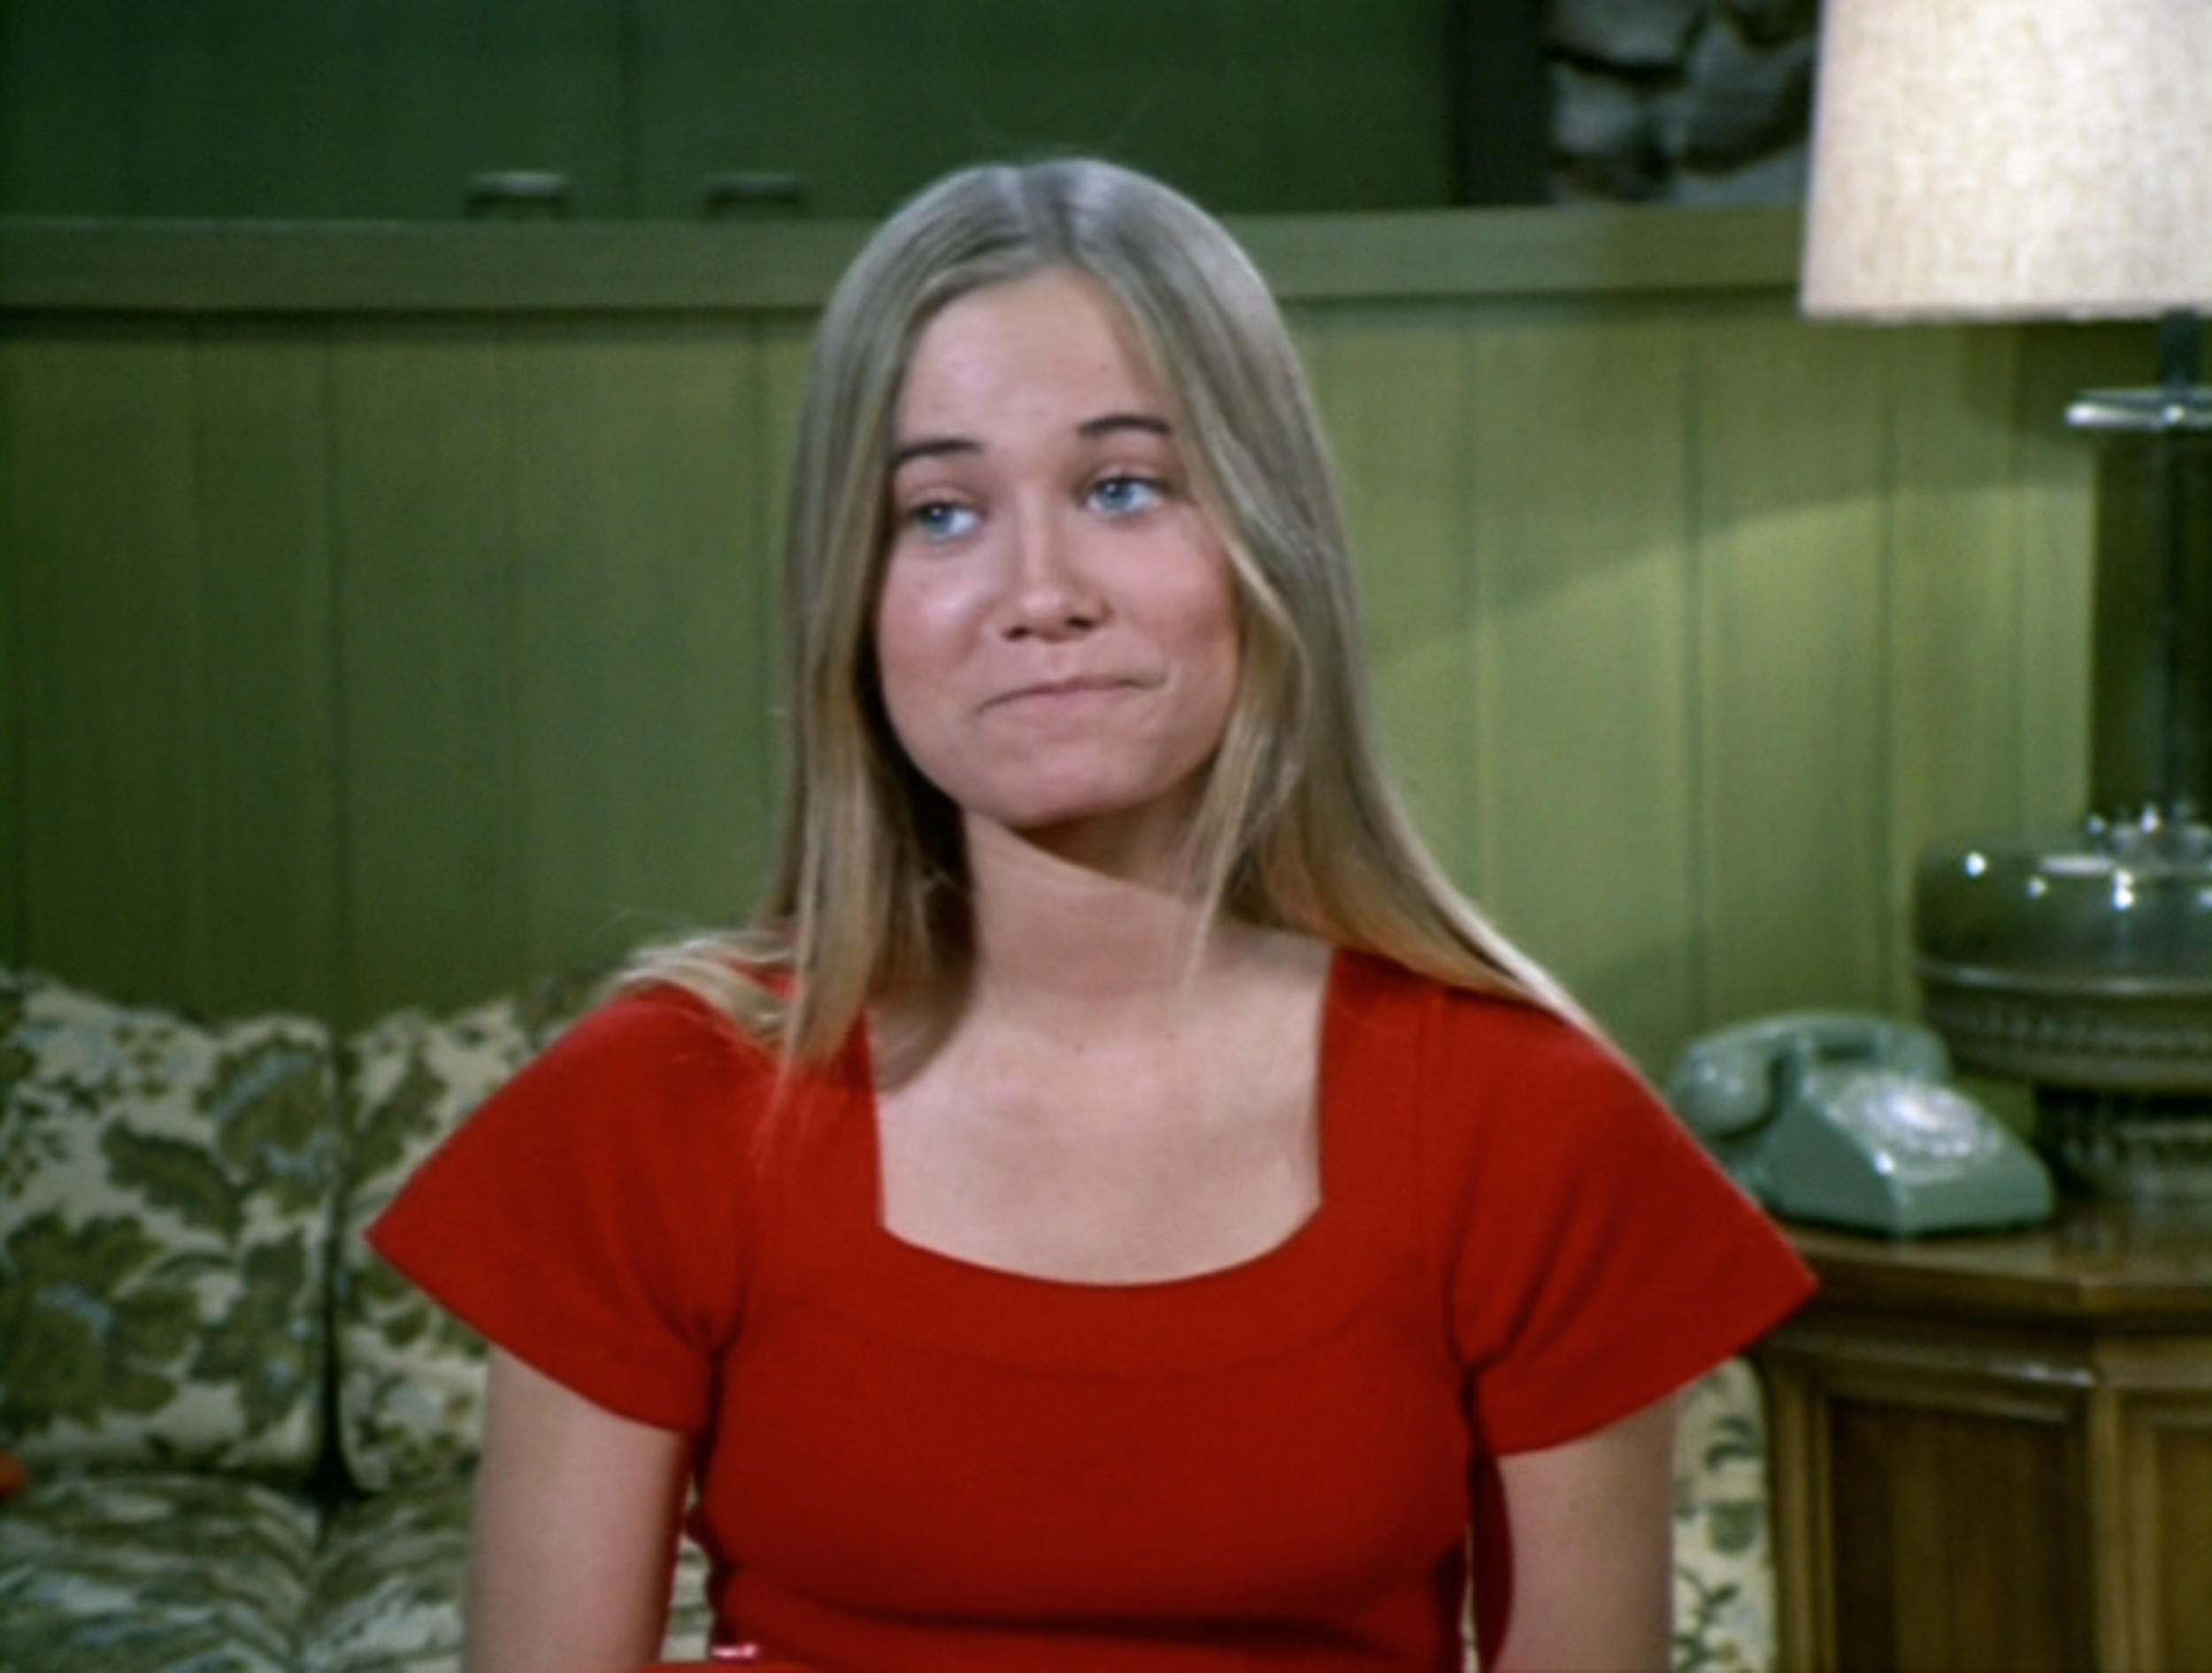 Maureen McCormick as Marcia Brady in the "The Subject Was Noses" episode of "The Brady Bunch" in Los Angeles, 1973 | Source: Getty Images